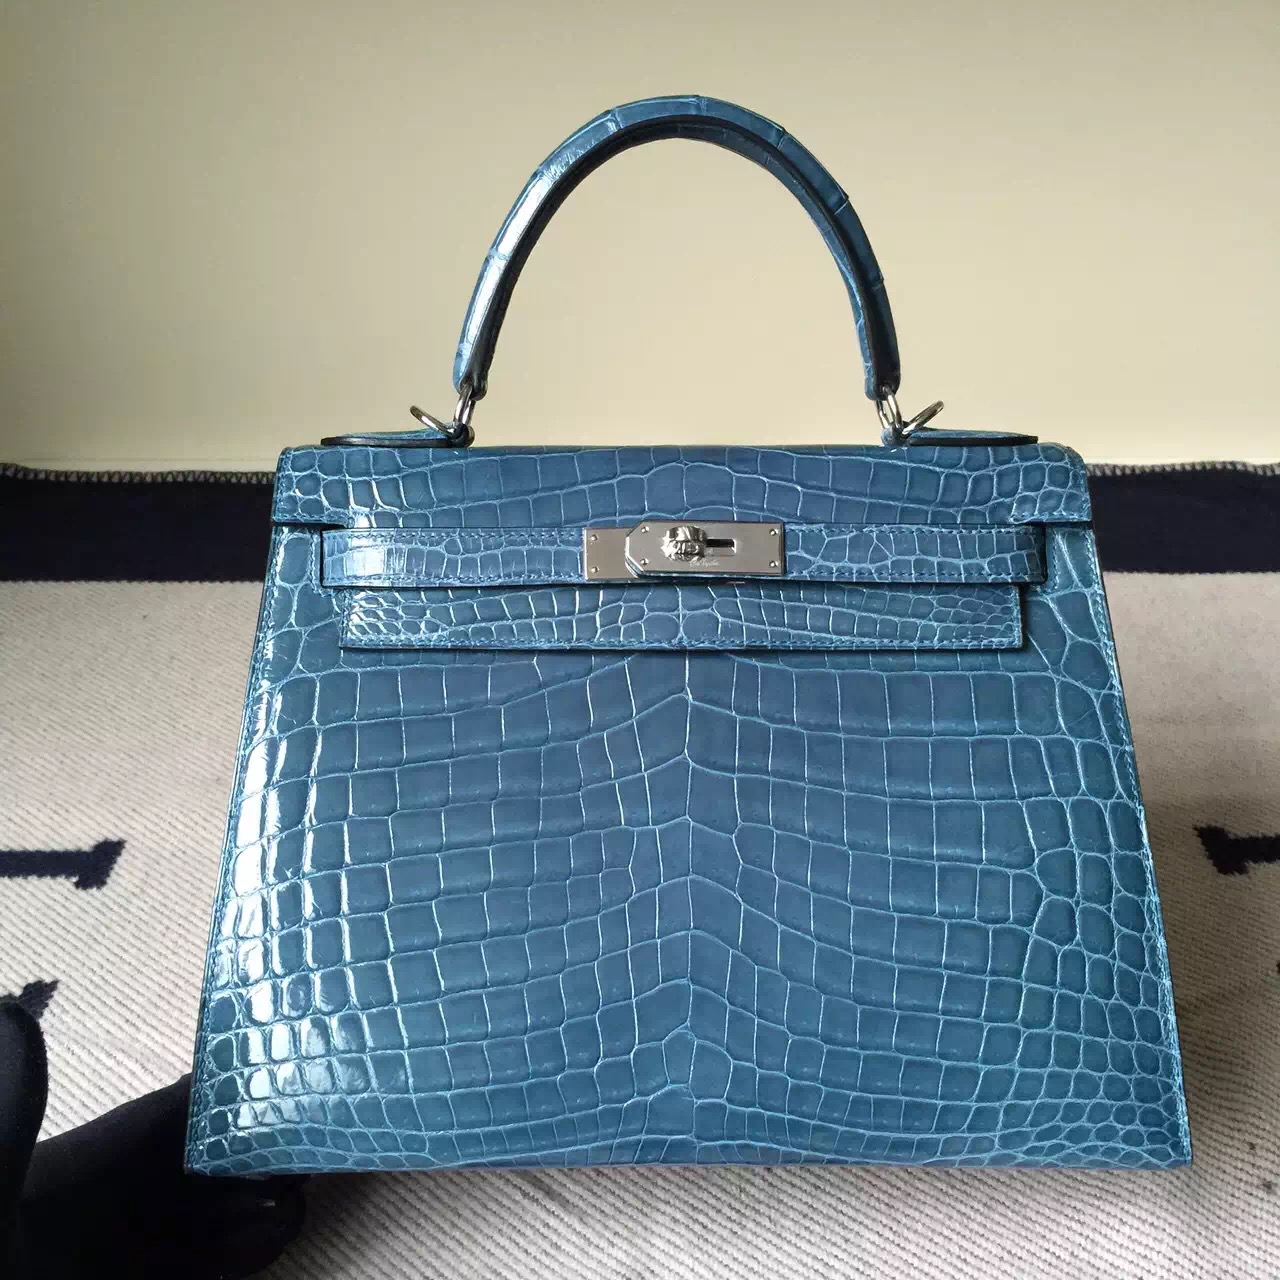 Wholesale Hermes Crocodile Shiny Leather Kelly Bag 18cm in 1P Duck Blue